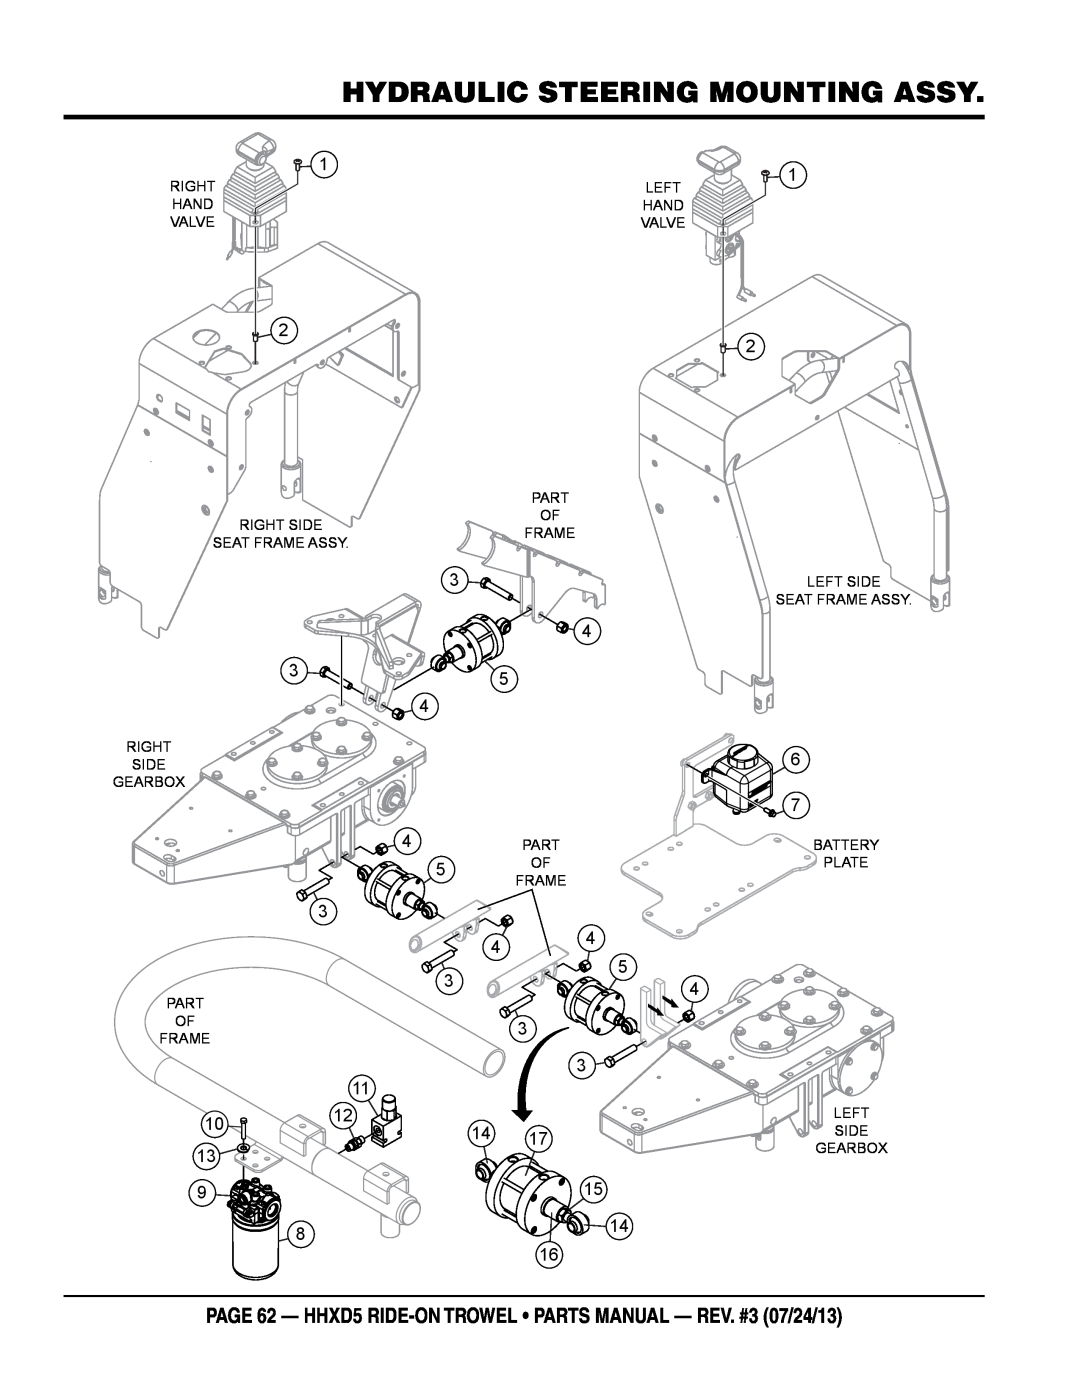 Multiquip HHSD5 hydraulic steering MOUNTING assy, page 62 - HHXD5 RIDE-ON TROWEL parts manual - rev. #3 07/24/13 